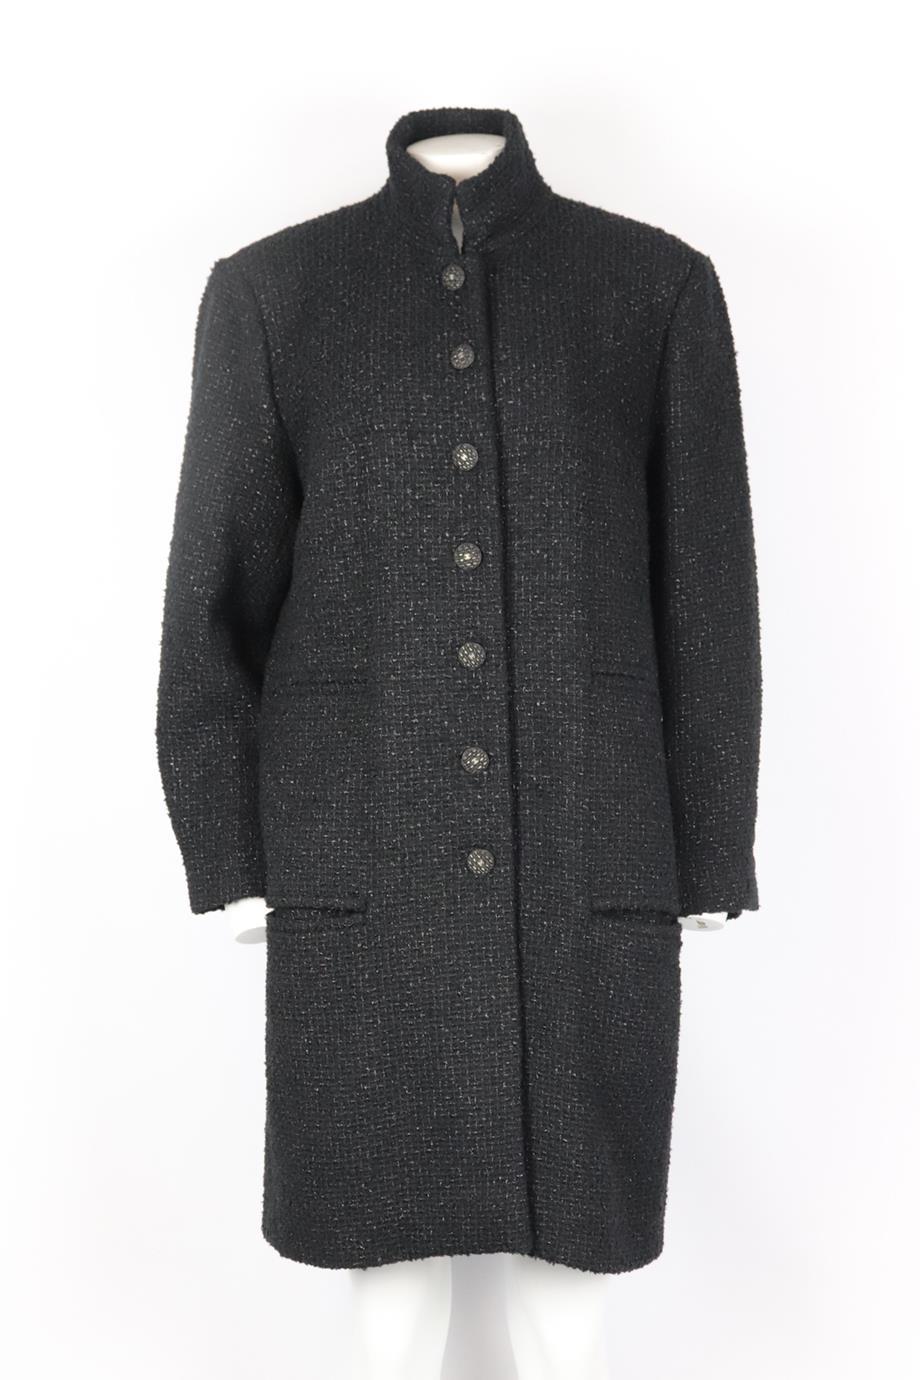 Chanel 2018 cotton and wool blend tweed coat. Black. Long sleeve, crewneck. Button fastening at front. 60% Cotton, 14% acrylic, 13% wool, 13% polyamide; lining: 100% silk. Size: FR 50 (UK 22, US 18, IT 54). Shoulder to shoulder: 17 in. Bust: 40 in.